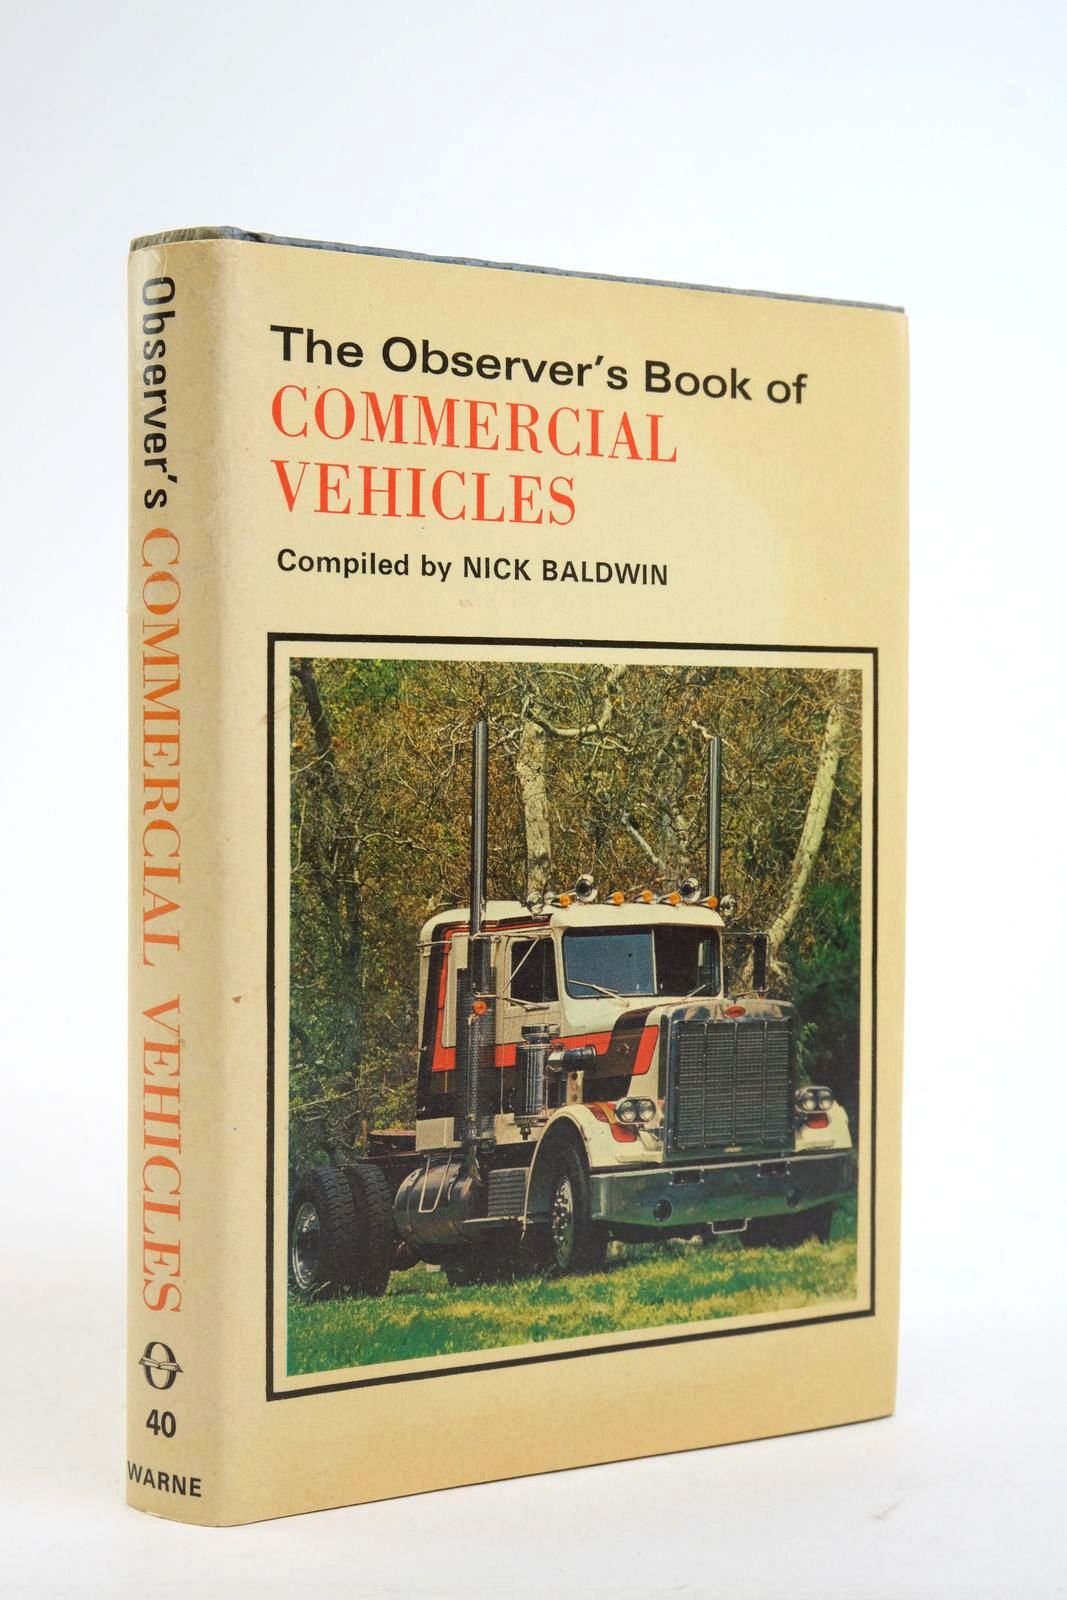 Photo of THE OBSERVER'S BOOK OF COMMERCIAL VEHICLES written by Baldwin, Nick published by Frederick Warne & Co Ltd. (STOCK CODE: 2136305)  for sale by Stella & Rose's Books